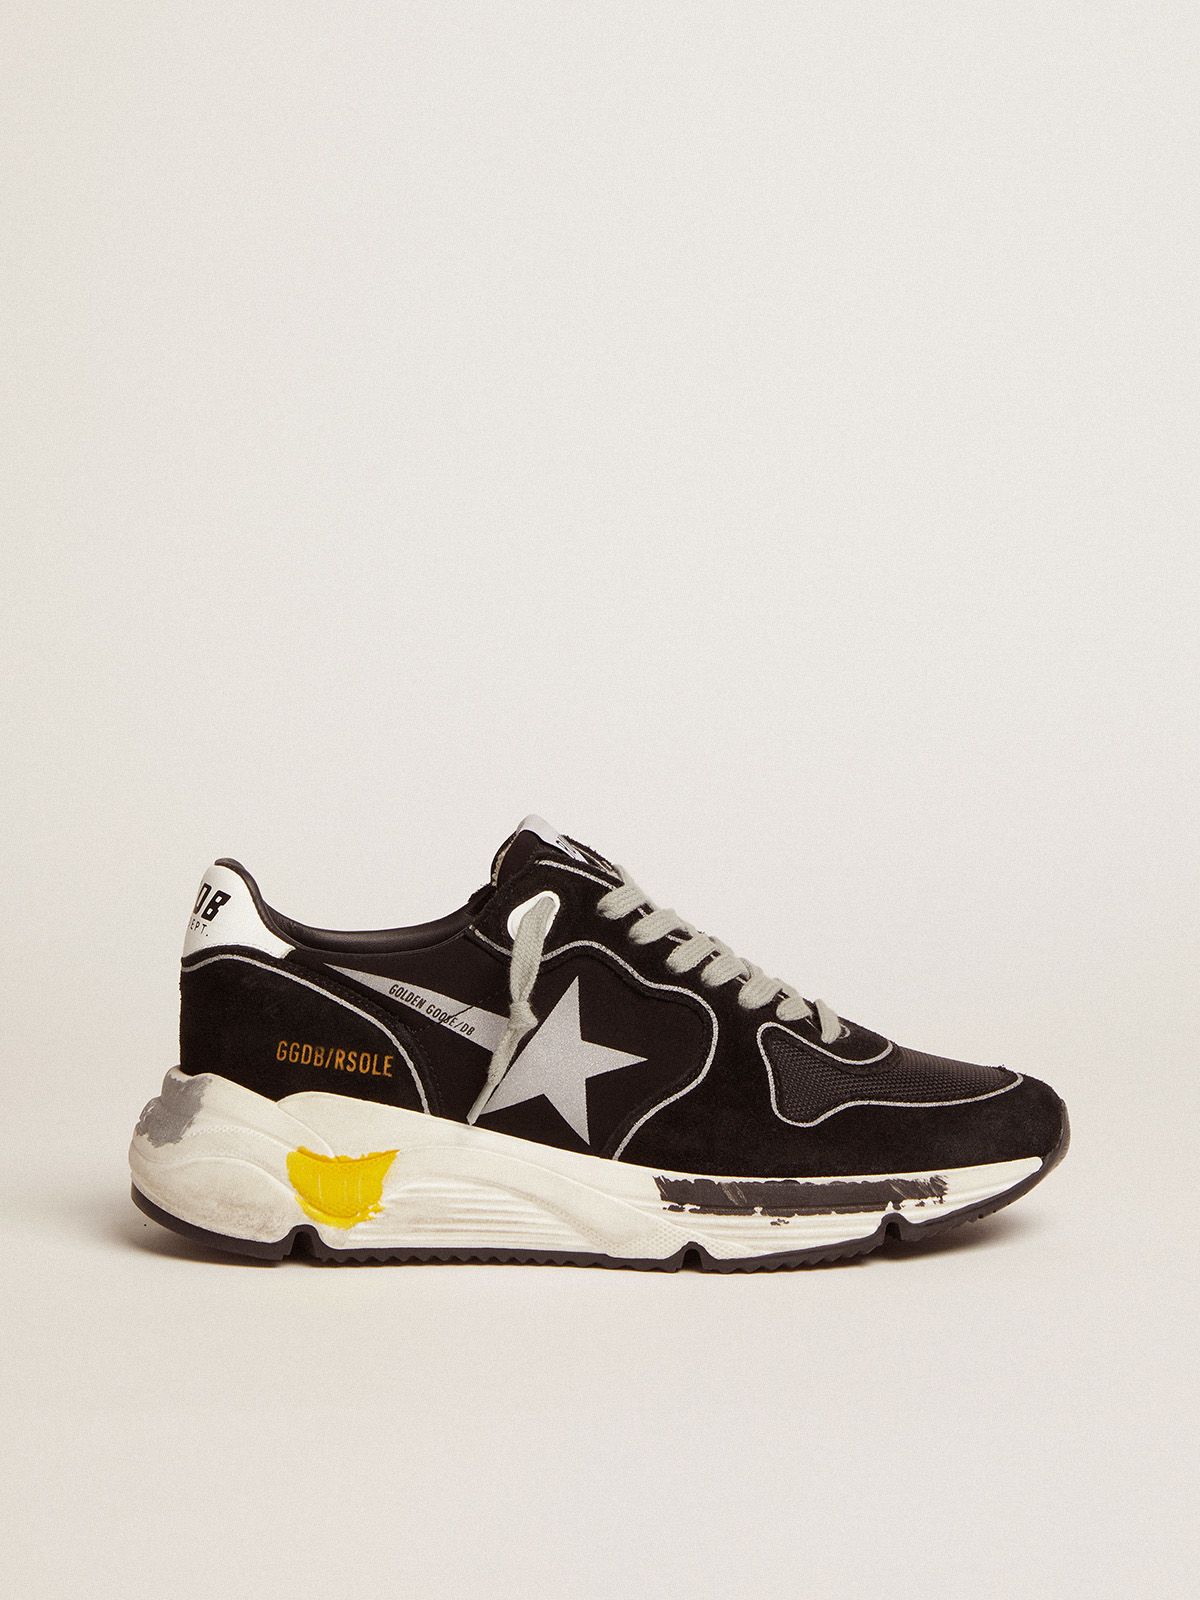 golden goose Black with silver Sole sneakers star Running